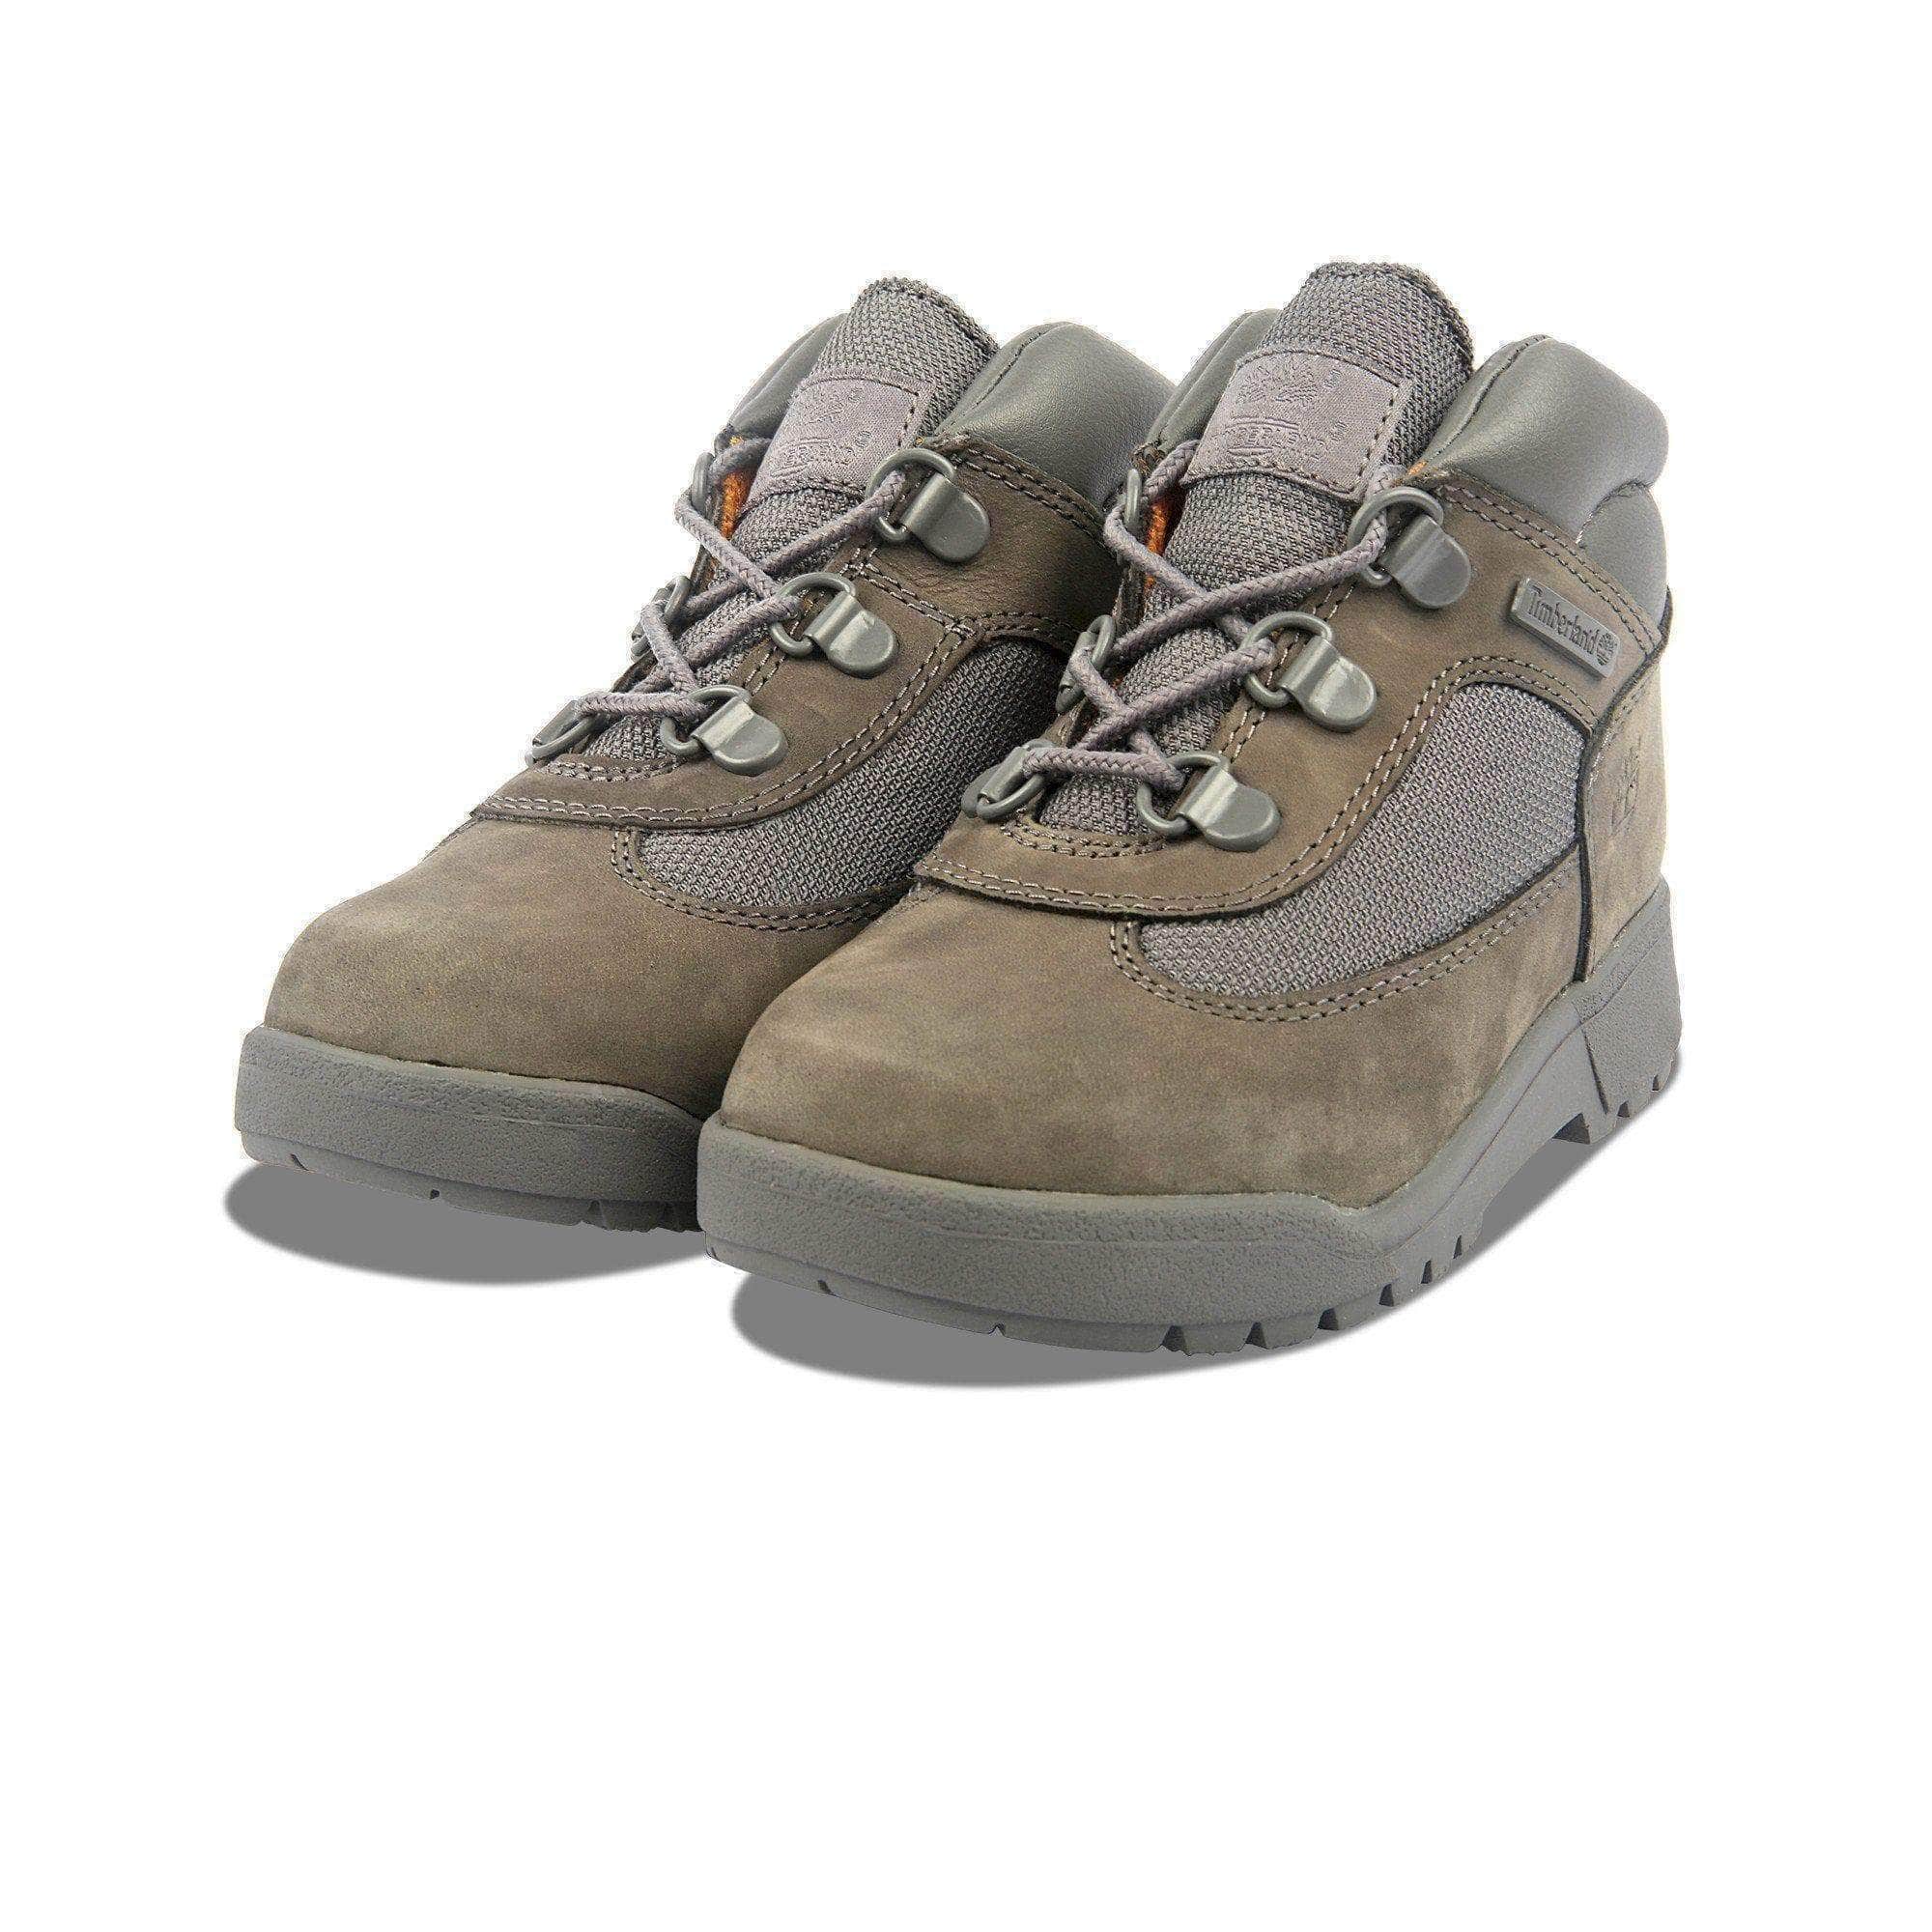 Timberland Field Boot - Boy's Toddler's